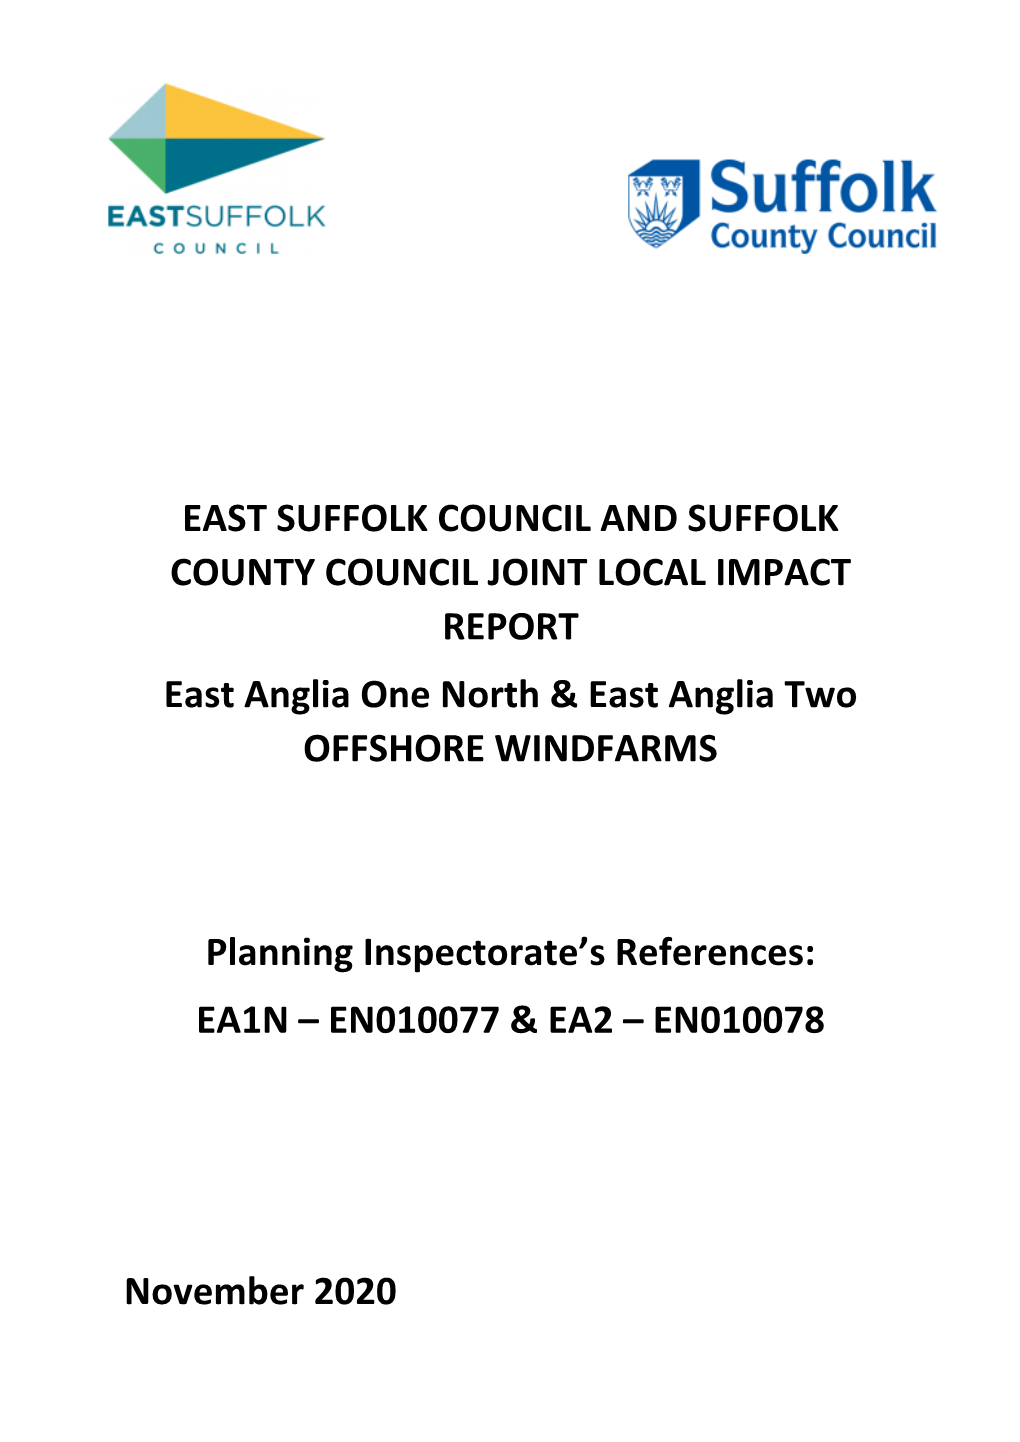 EAST SUFFOLK COUNCIL and SUFFOLK COUNTY COUNCIL JOINT LOCAL IMPACT REPORT East Anglia One North & East Anglia Two OFFSHORE WINDFARMS